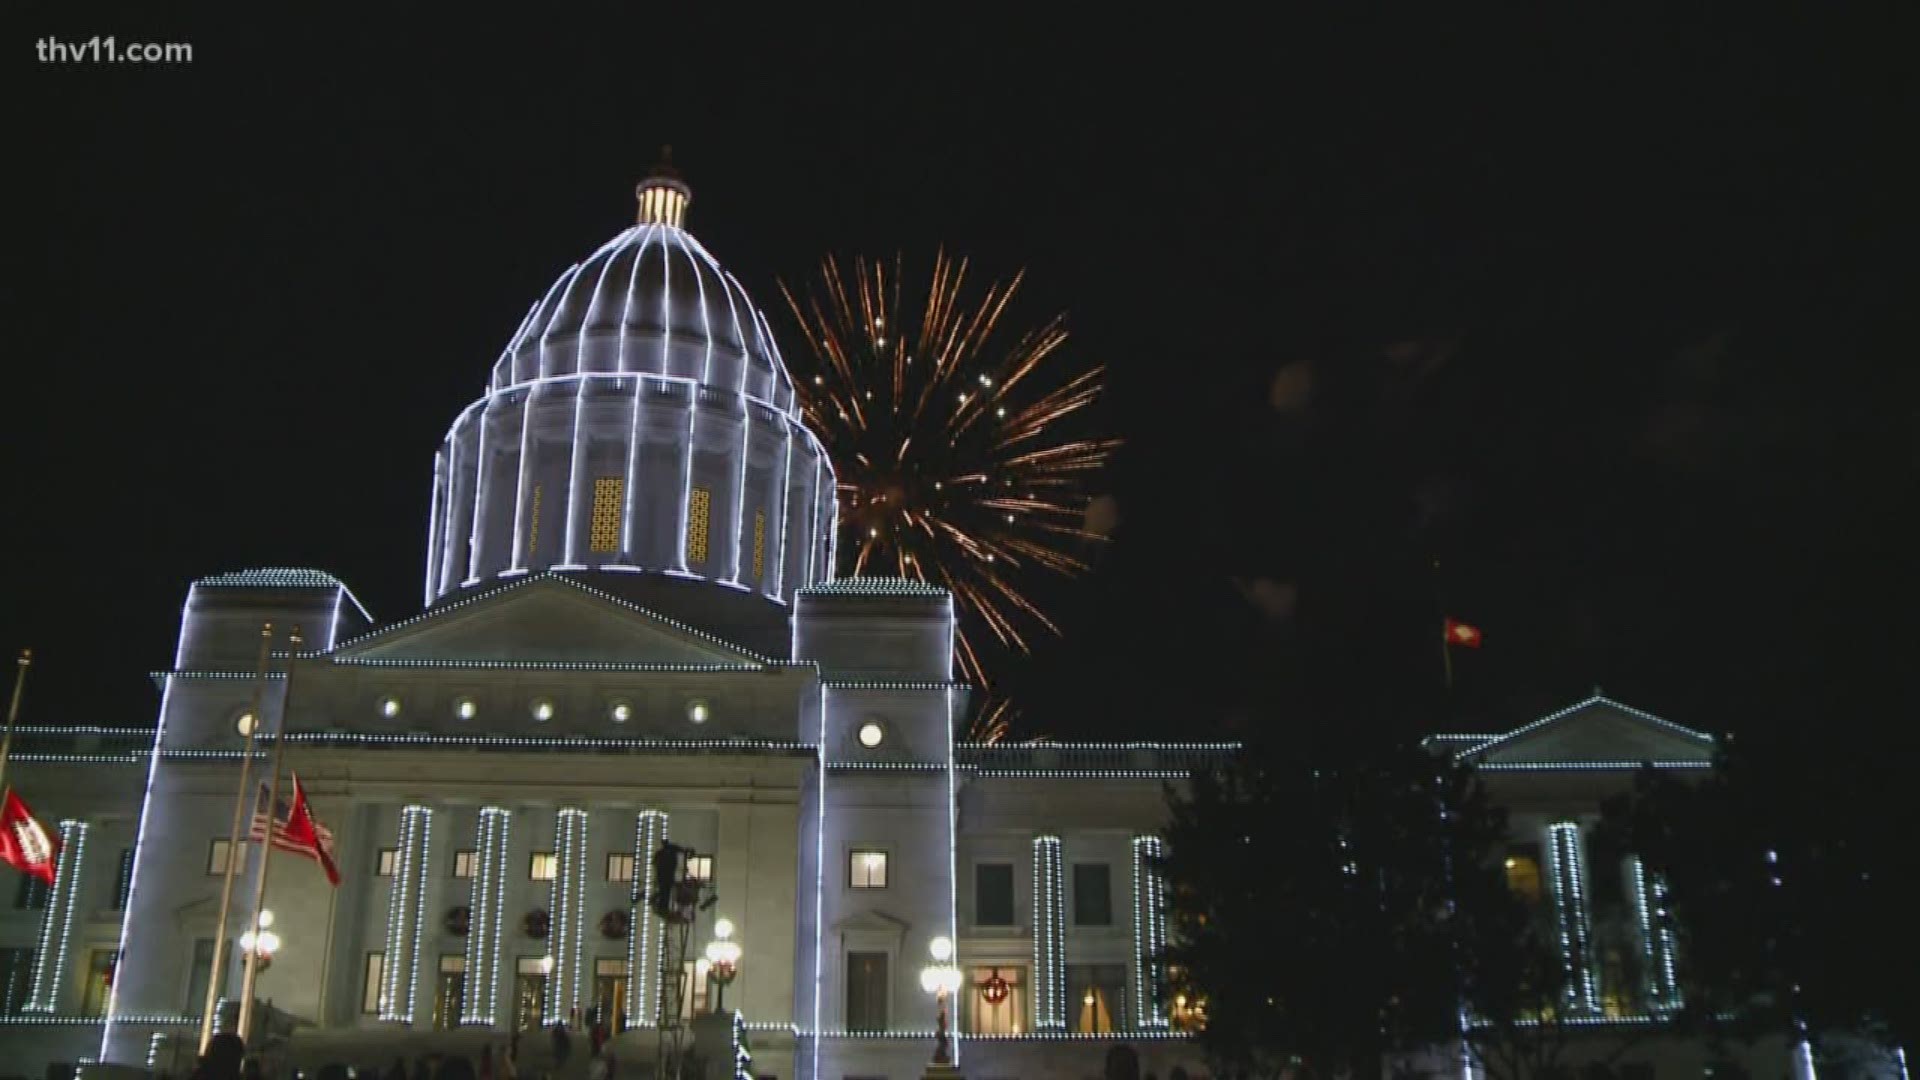 Then tonight, the capitol got to show off during the 80th annual State Capitol Lighting Ceremony.